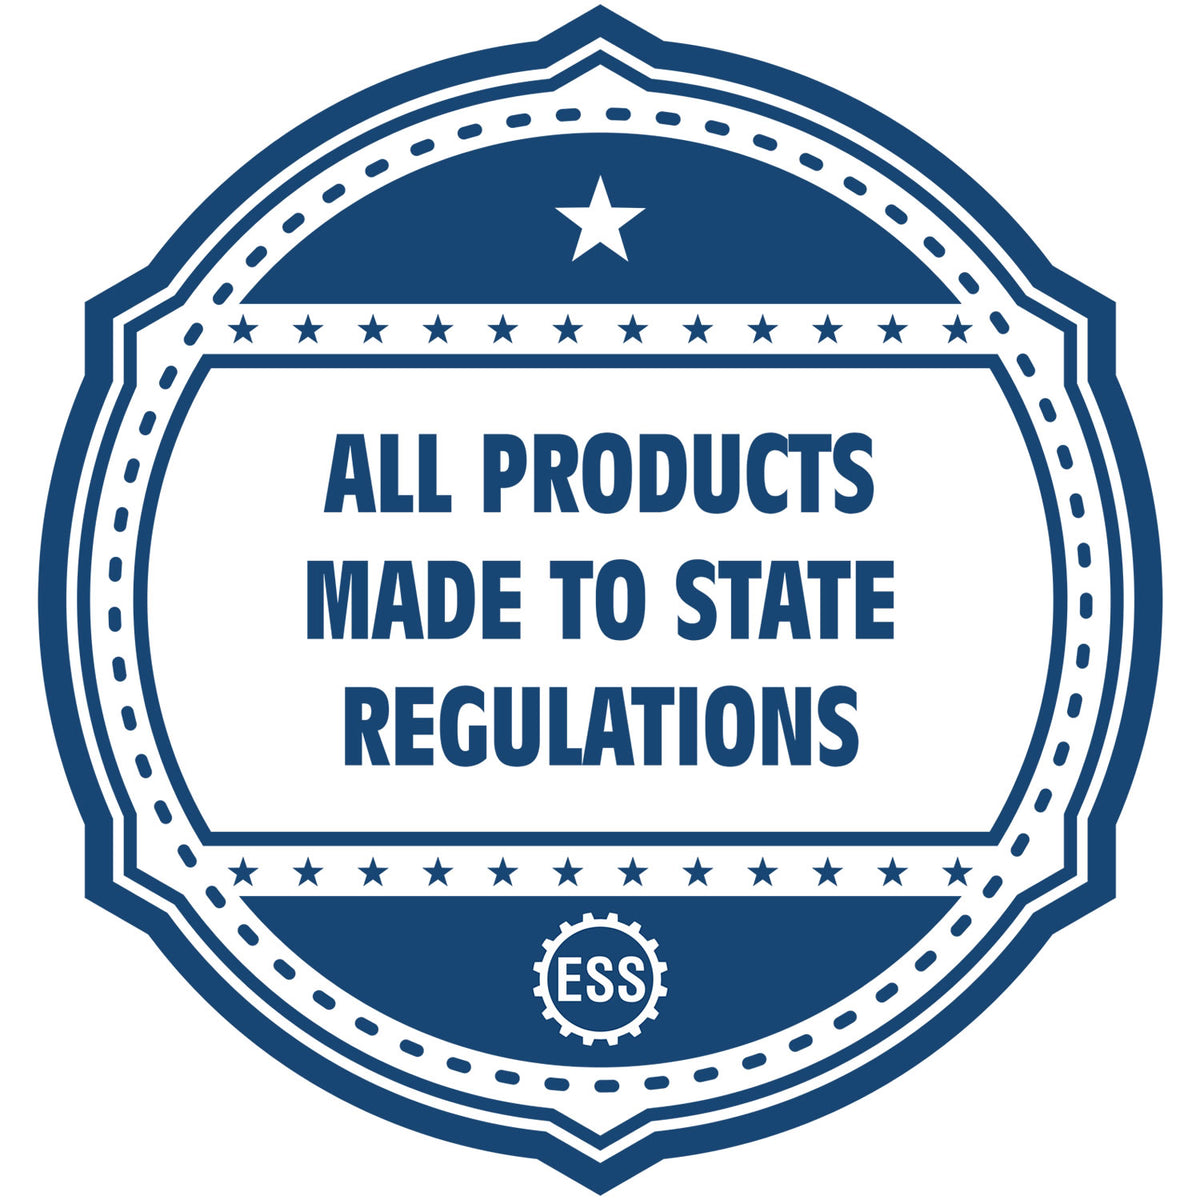 An icon or badge element for the Soft Pocket Florida Landscape Architect Embosser showing that this product is made in compliance with state regulations.